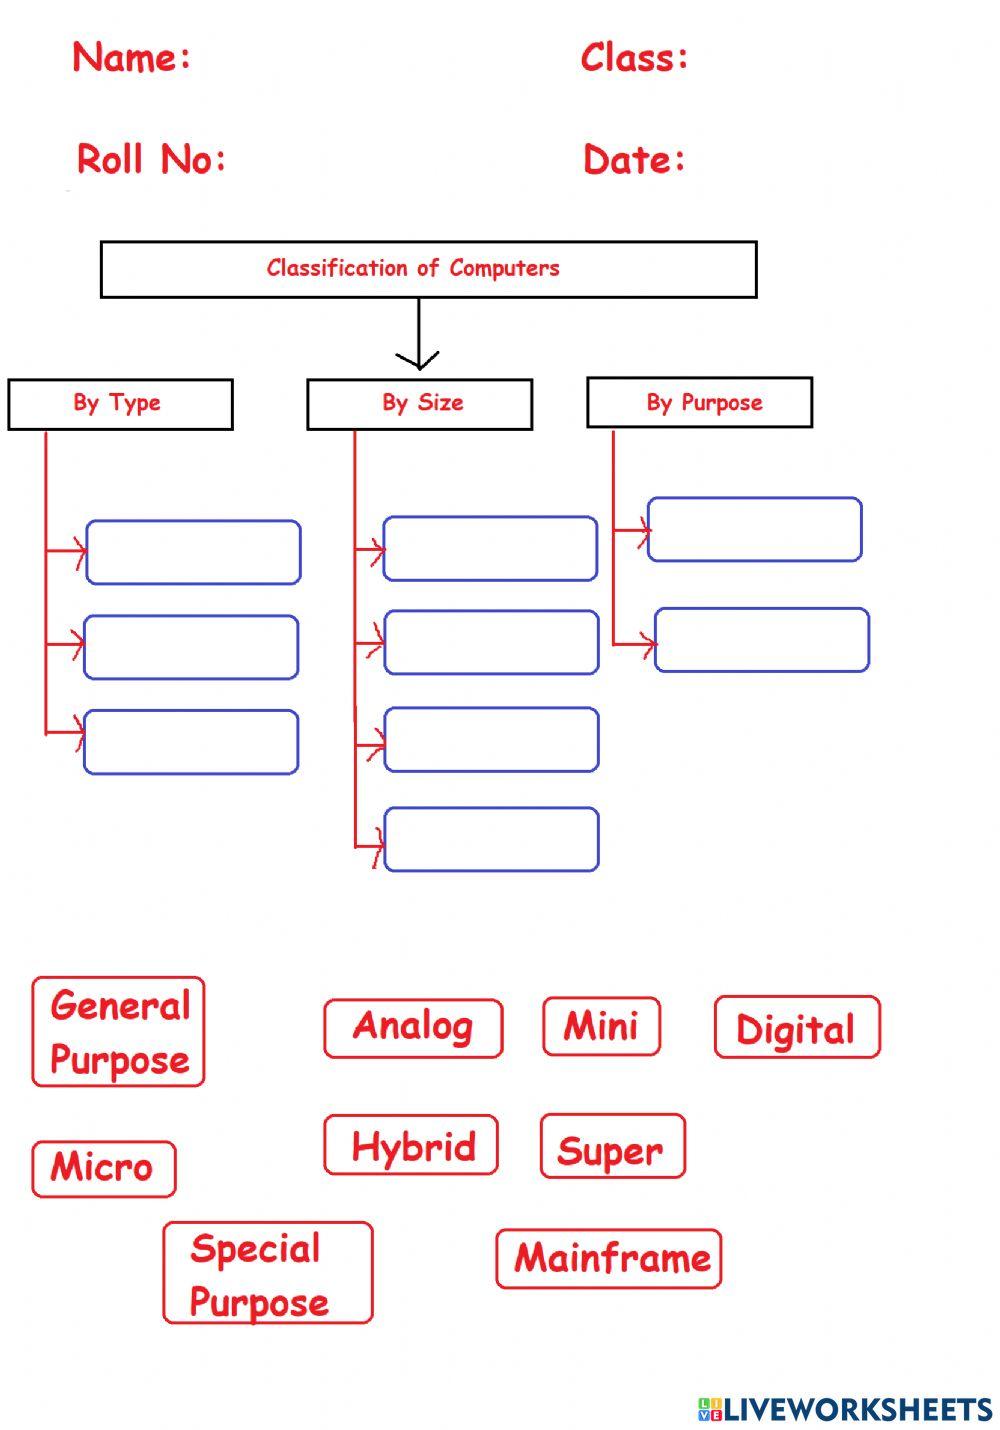 Types-of-Computers